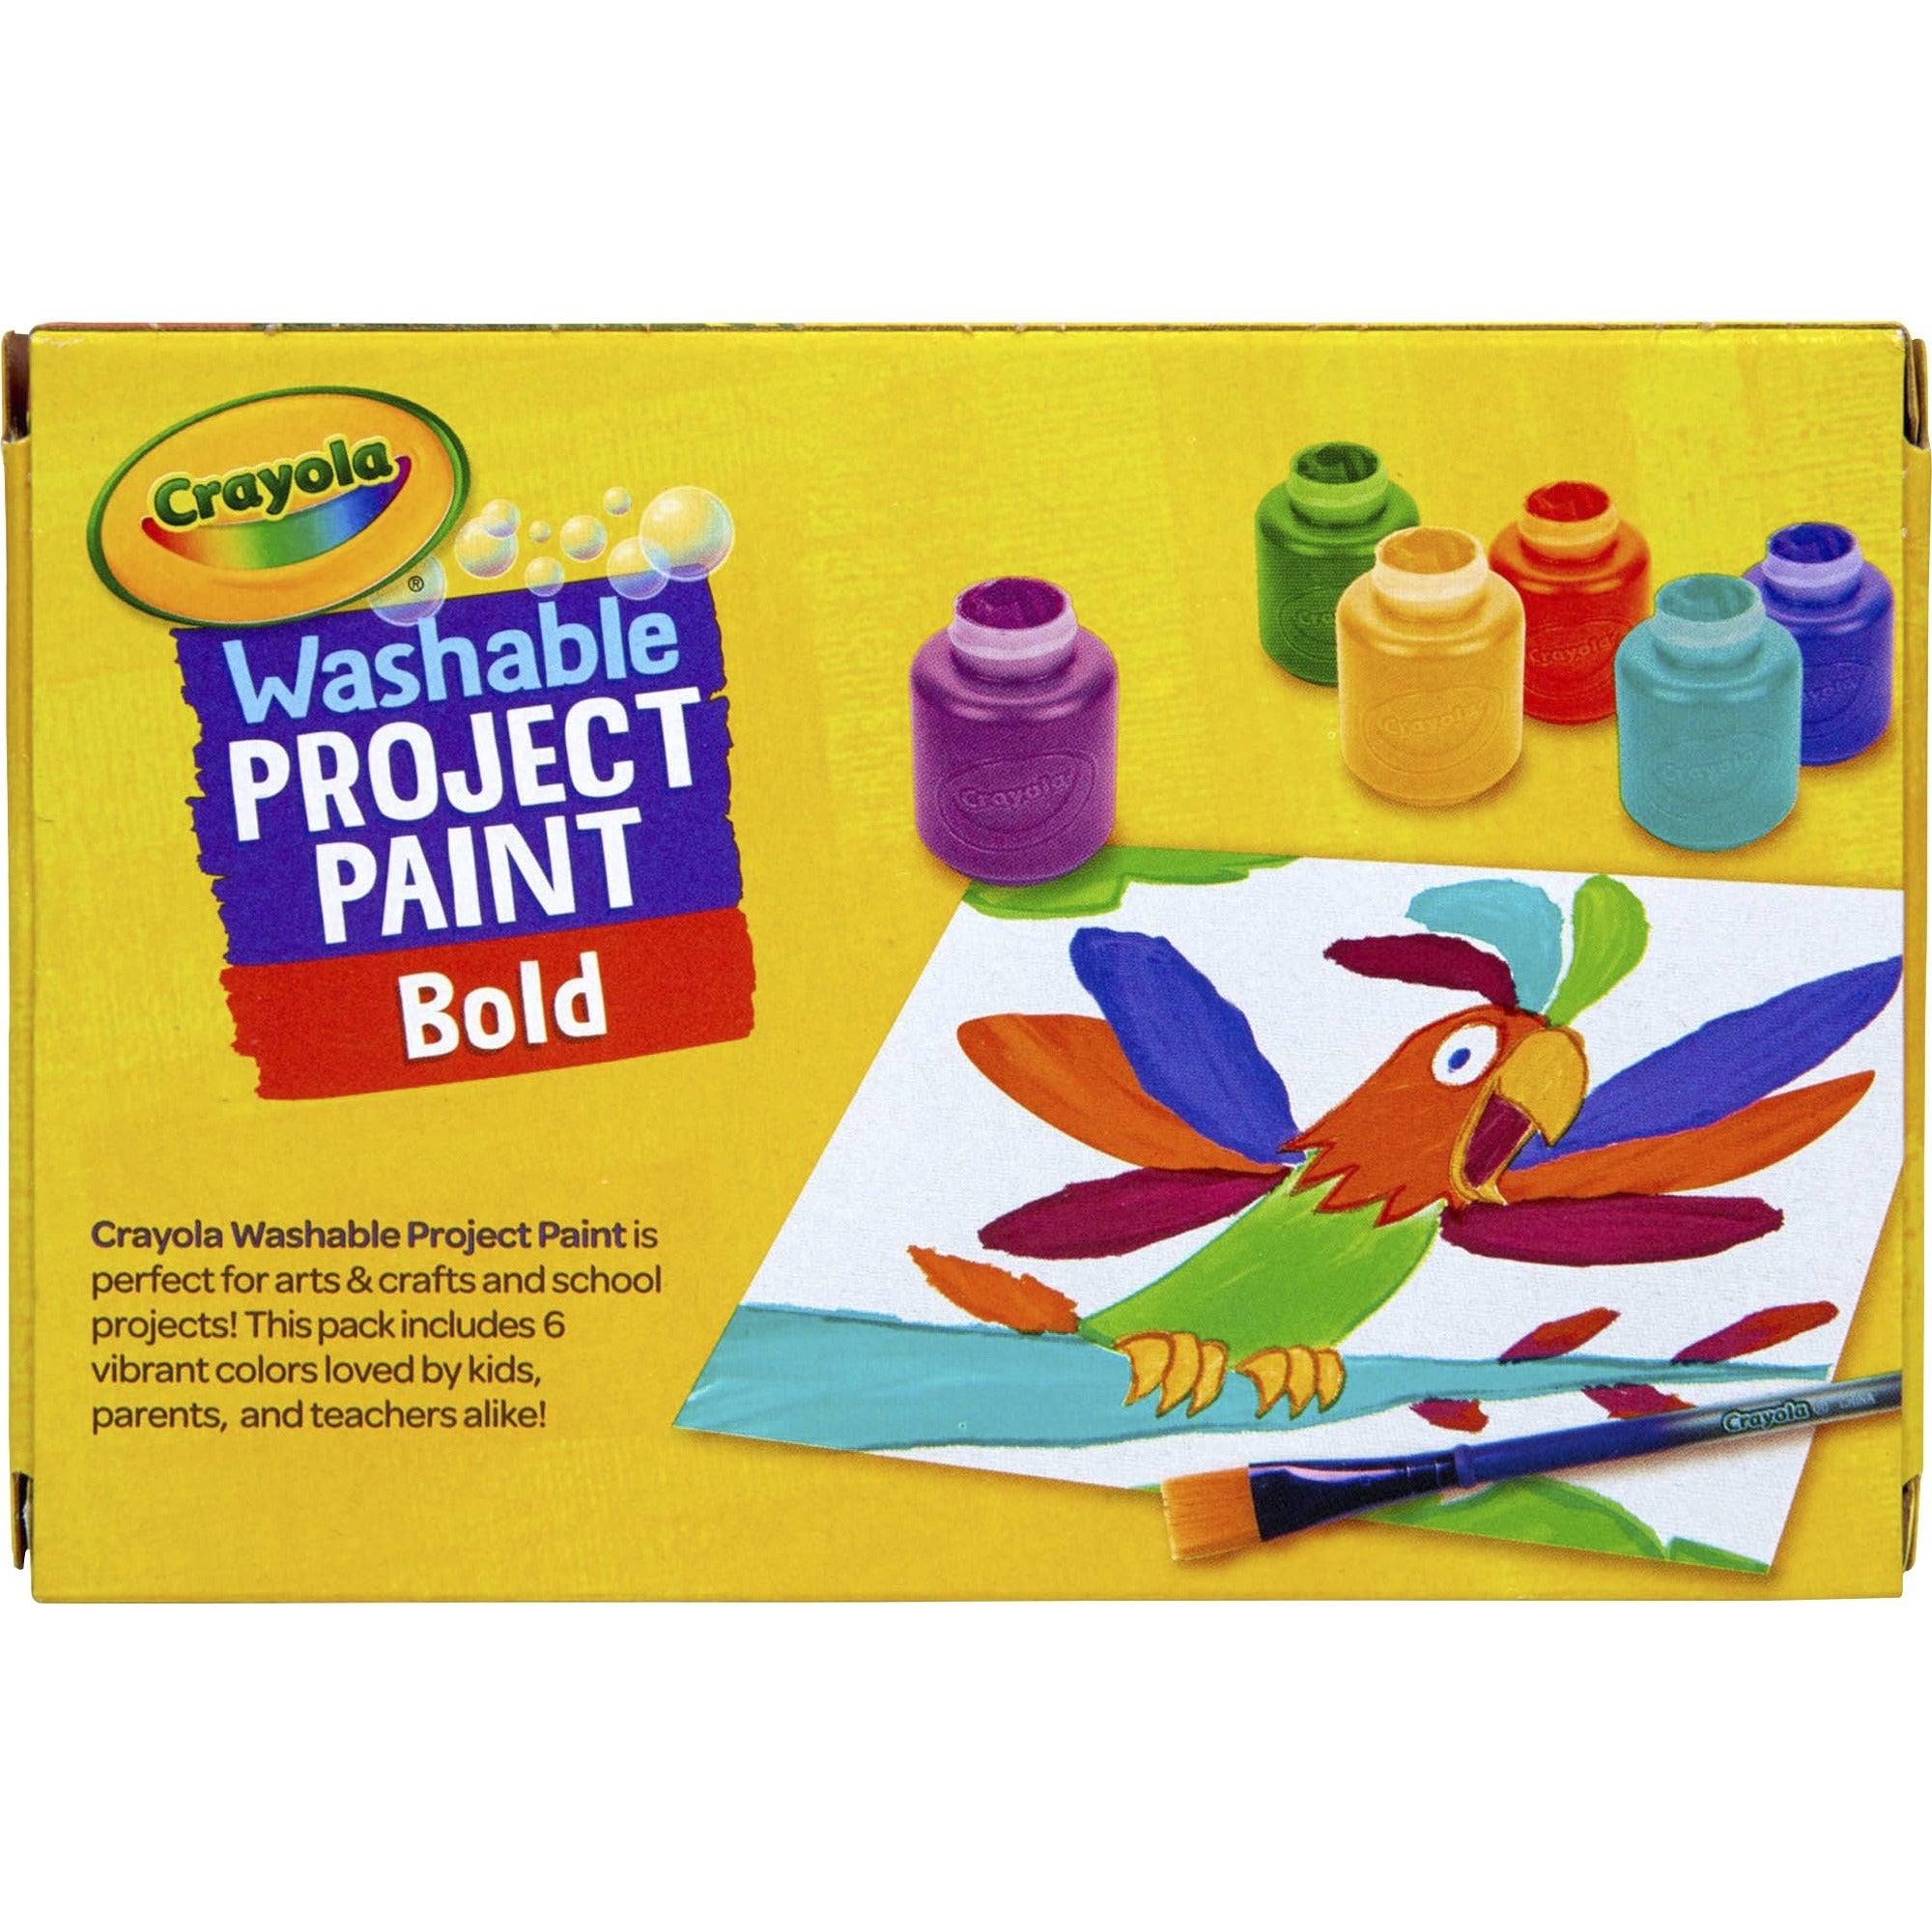 crayola-washable-project-paint-6-pack-yellow-green-yellow-orange-red-orange-fuchsia-blue-violet-teal_cyo542403 - 3